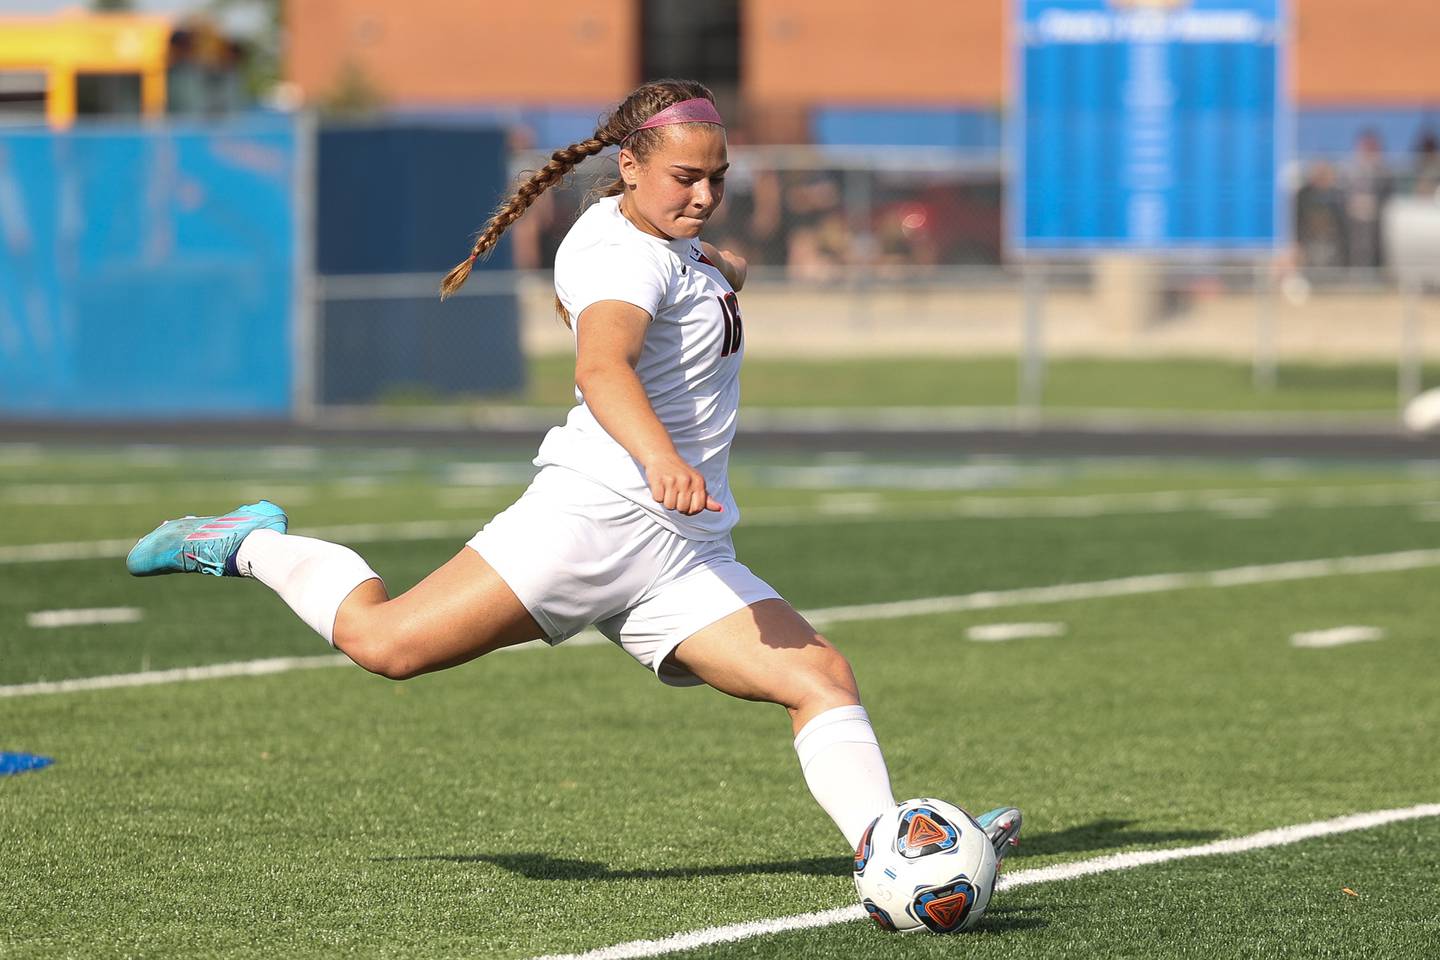 Lincoln-Way Central’s Grace Grundhofer puts the ball in play against Glenbard West in the Class 3A Sandburg Super-sectional. Tuesday, May 220, 2022 in Orland Park.